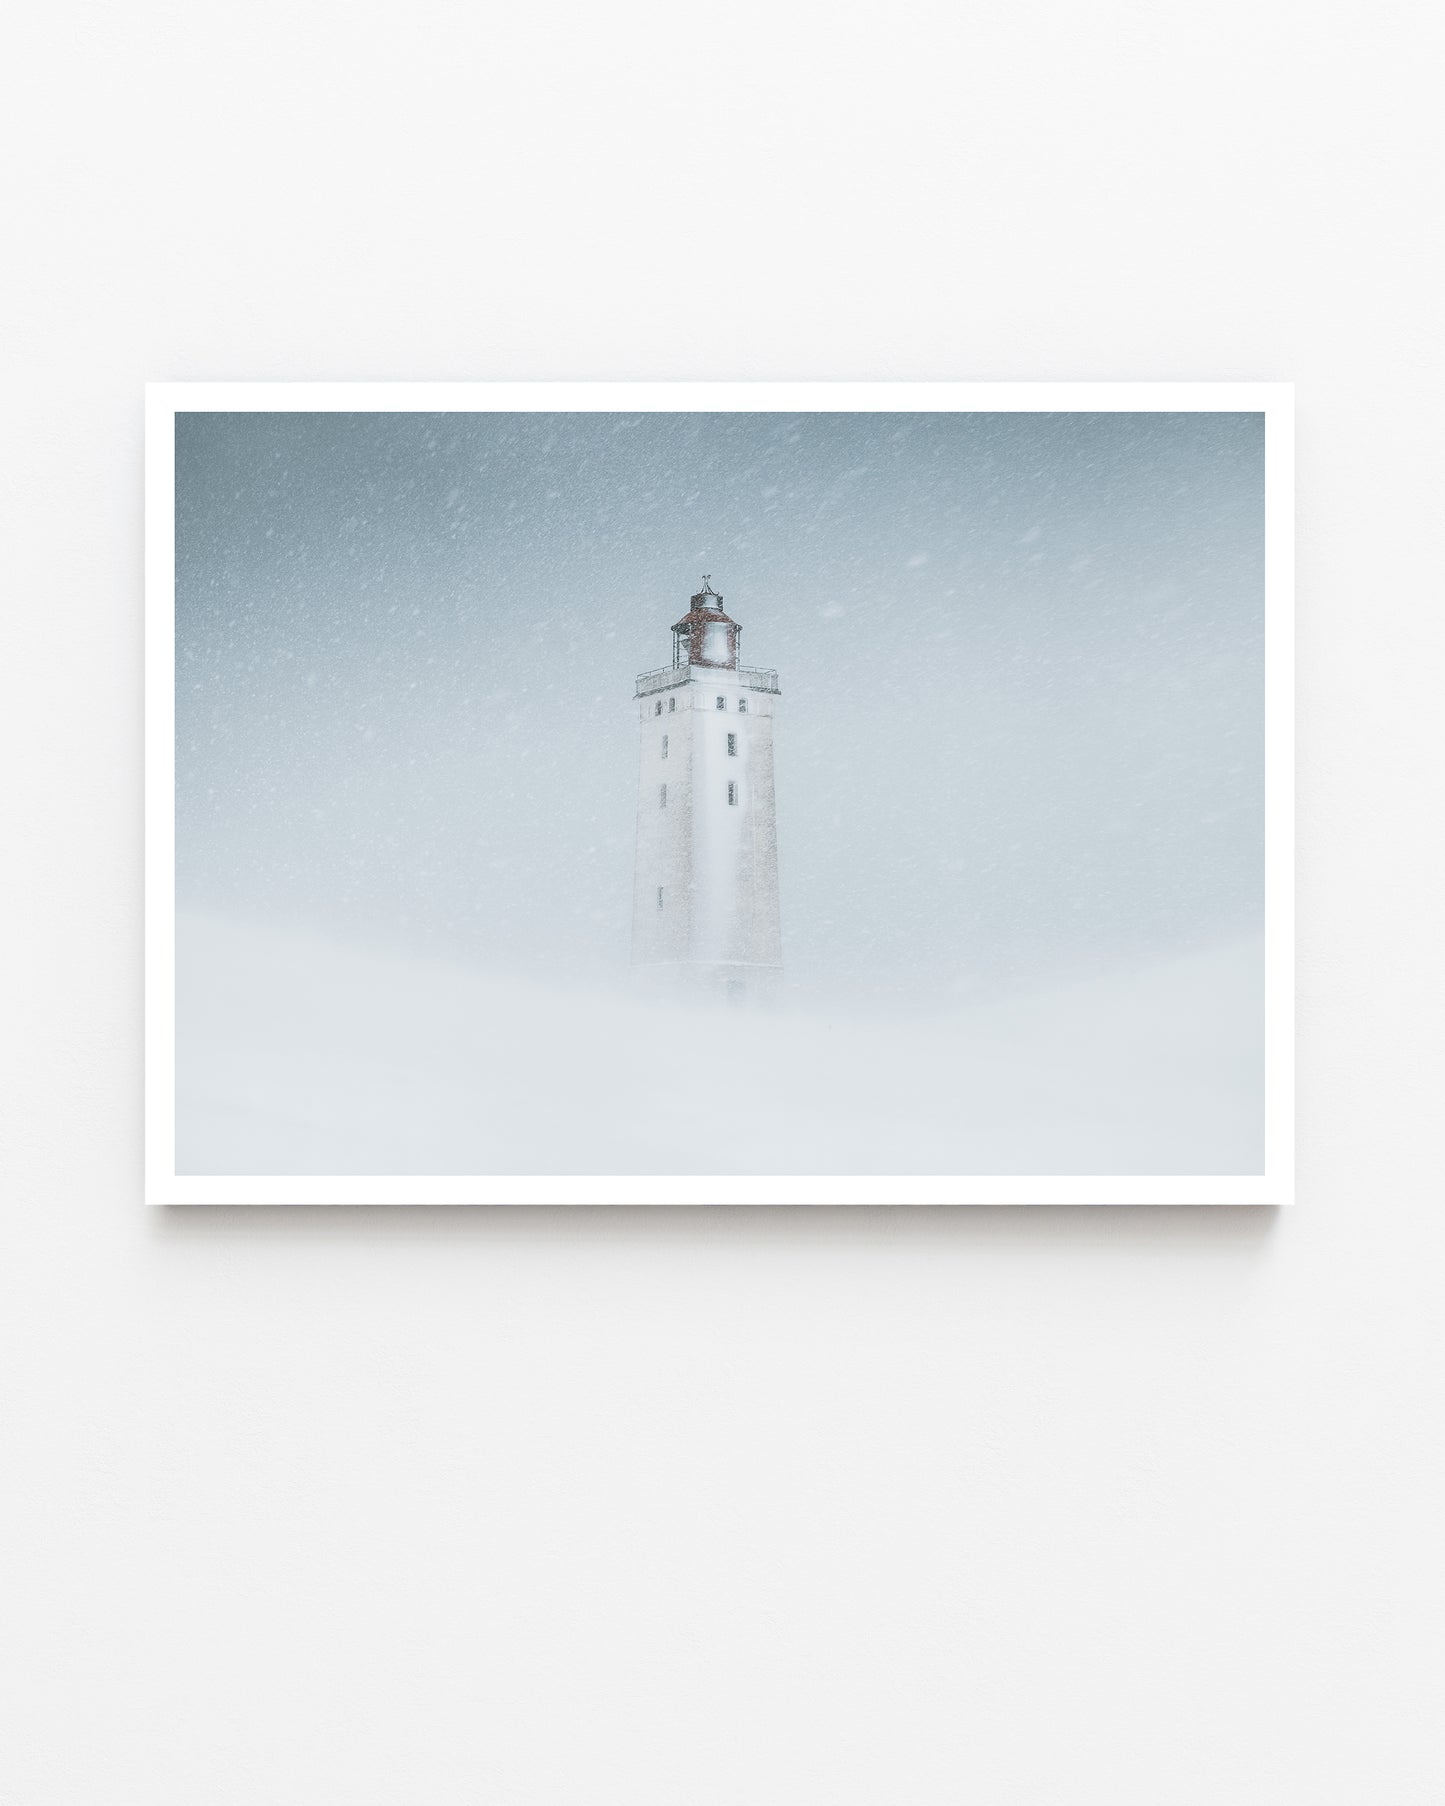 Rubjerg Knude Lighthouse in a Snowstorm